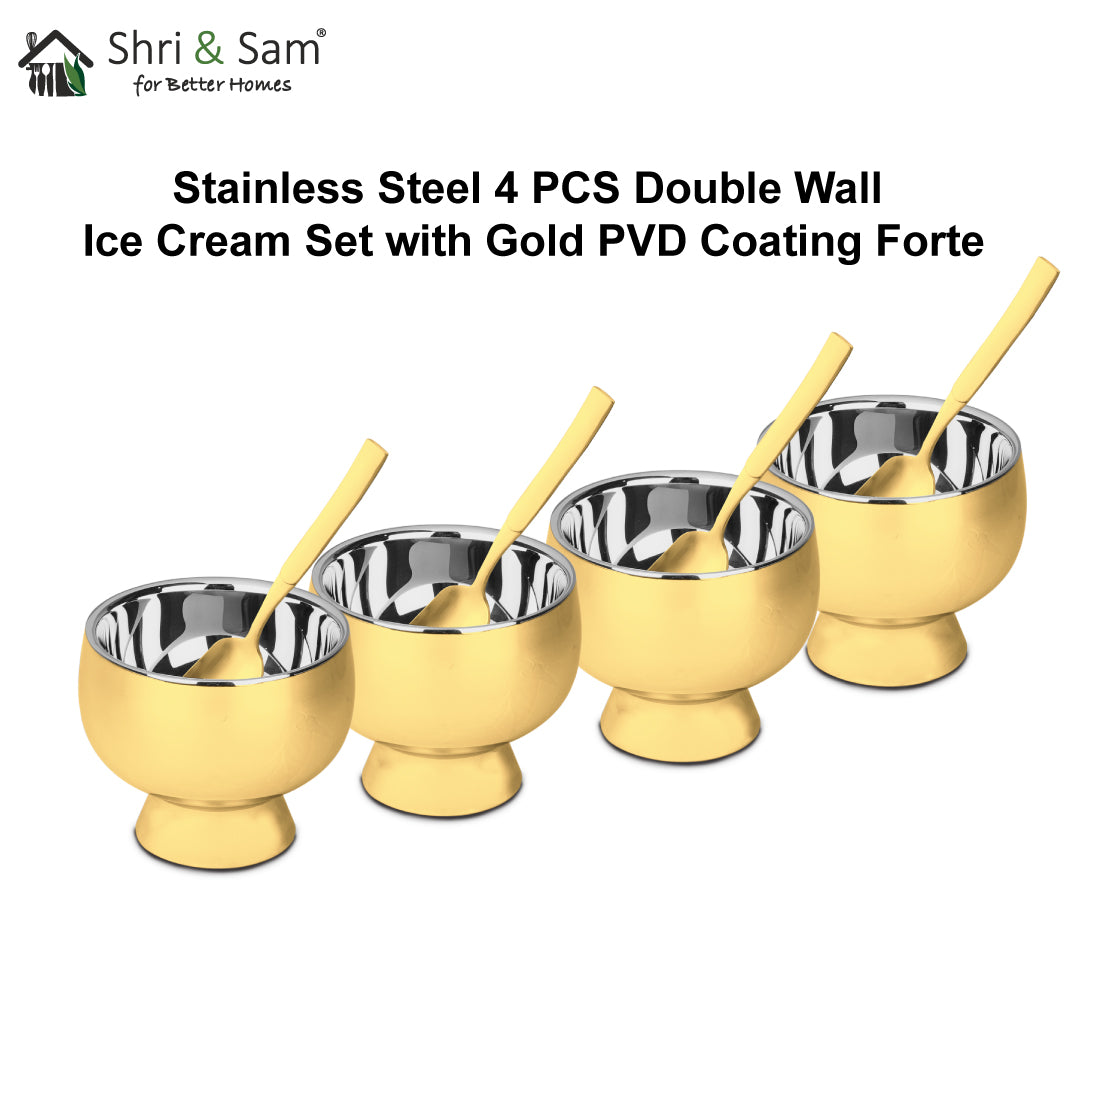 Stainless Steel 4 PCS Double Wall Ice Cream Set with Gold PVD Coating Forte